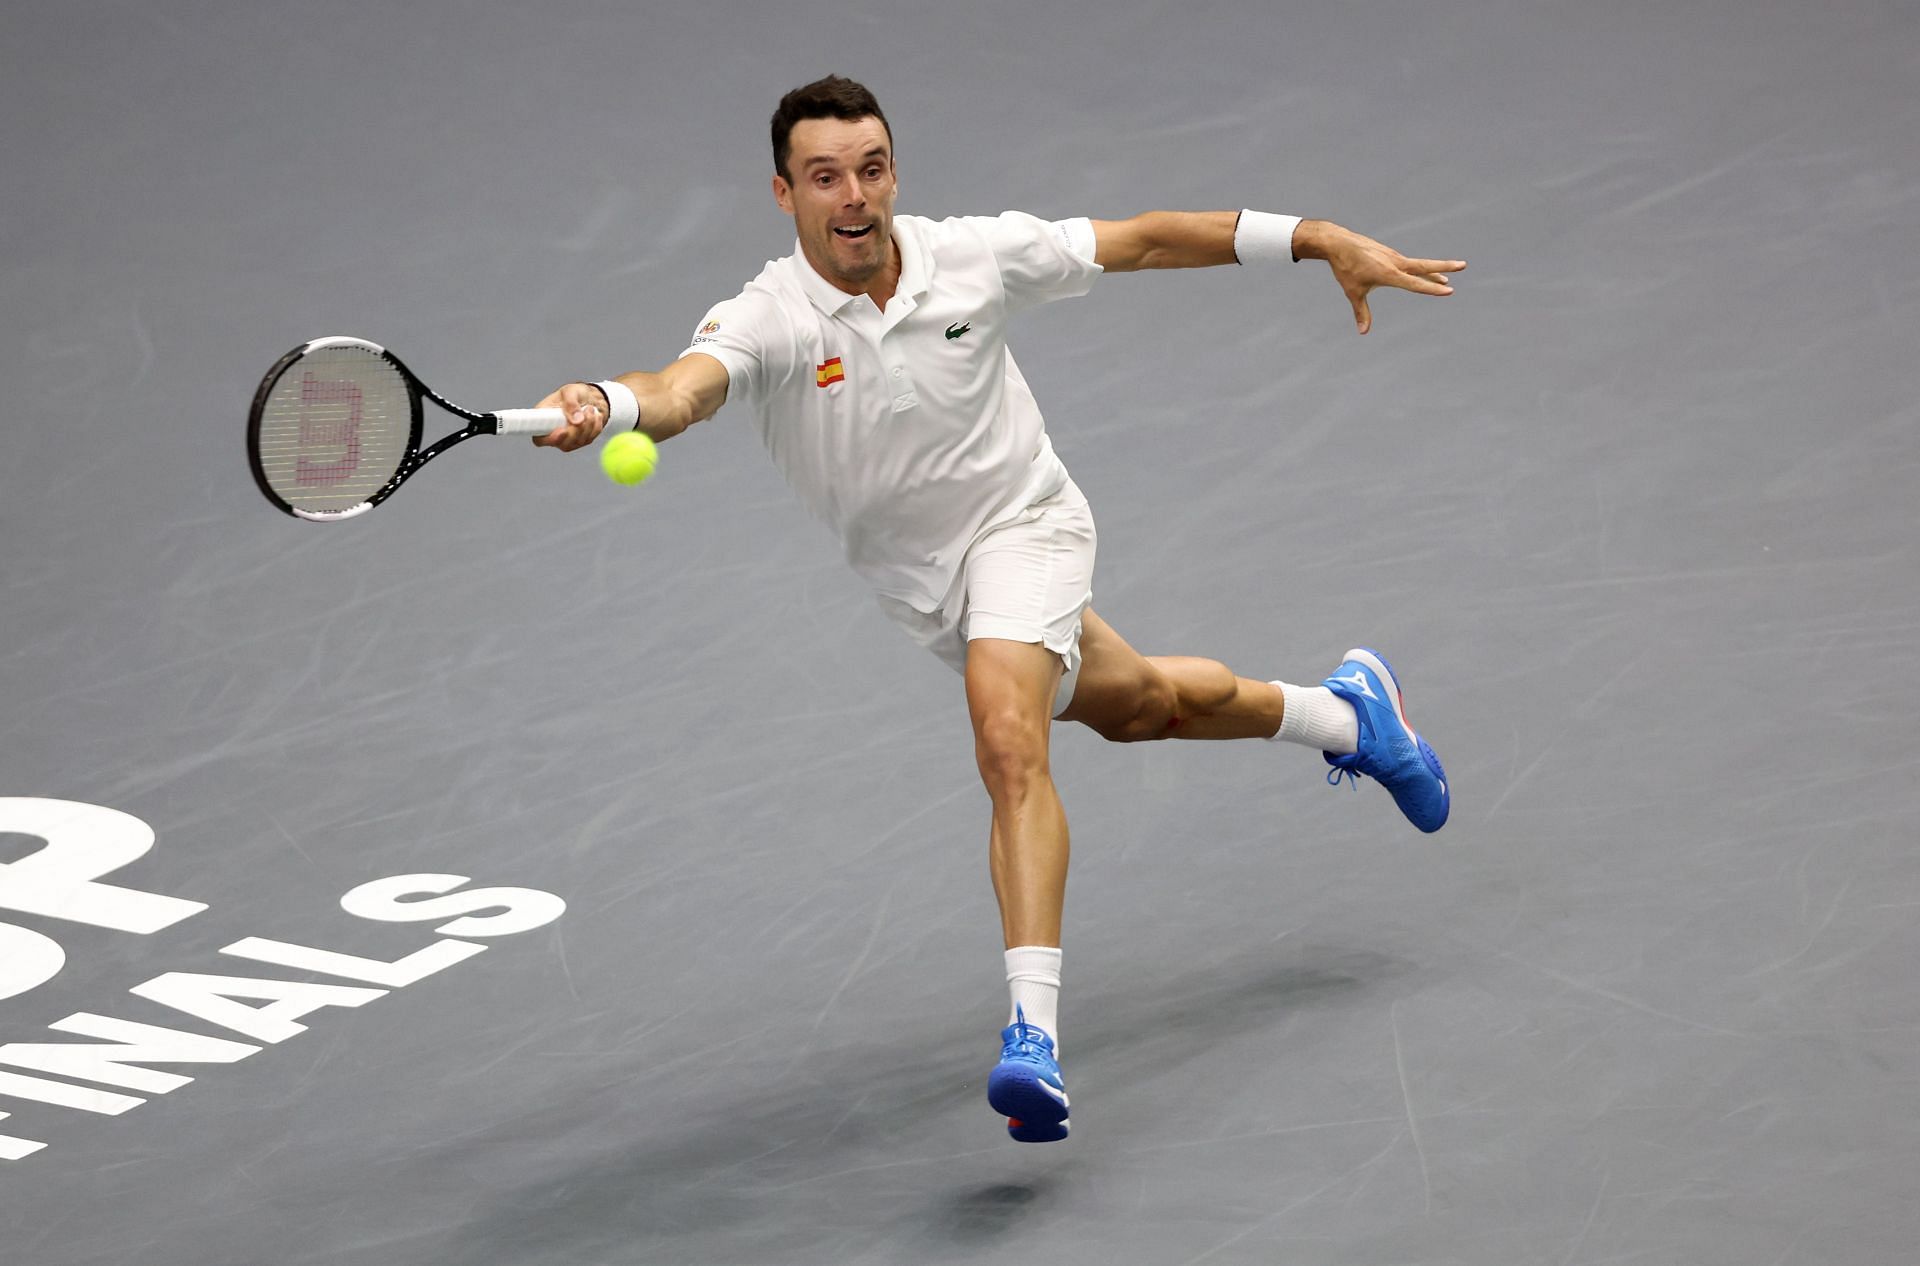 Bautista Agut in action at the 2022 Davis Cup Finals